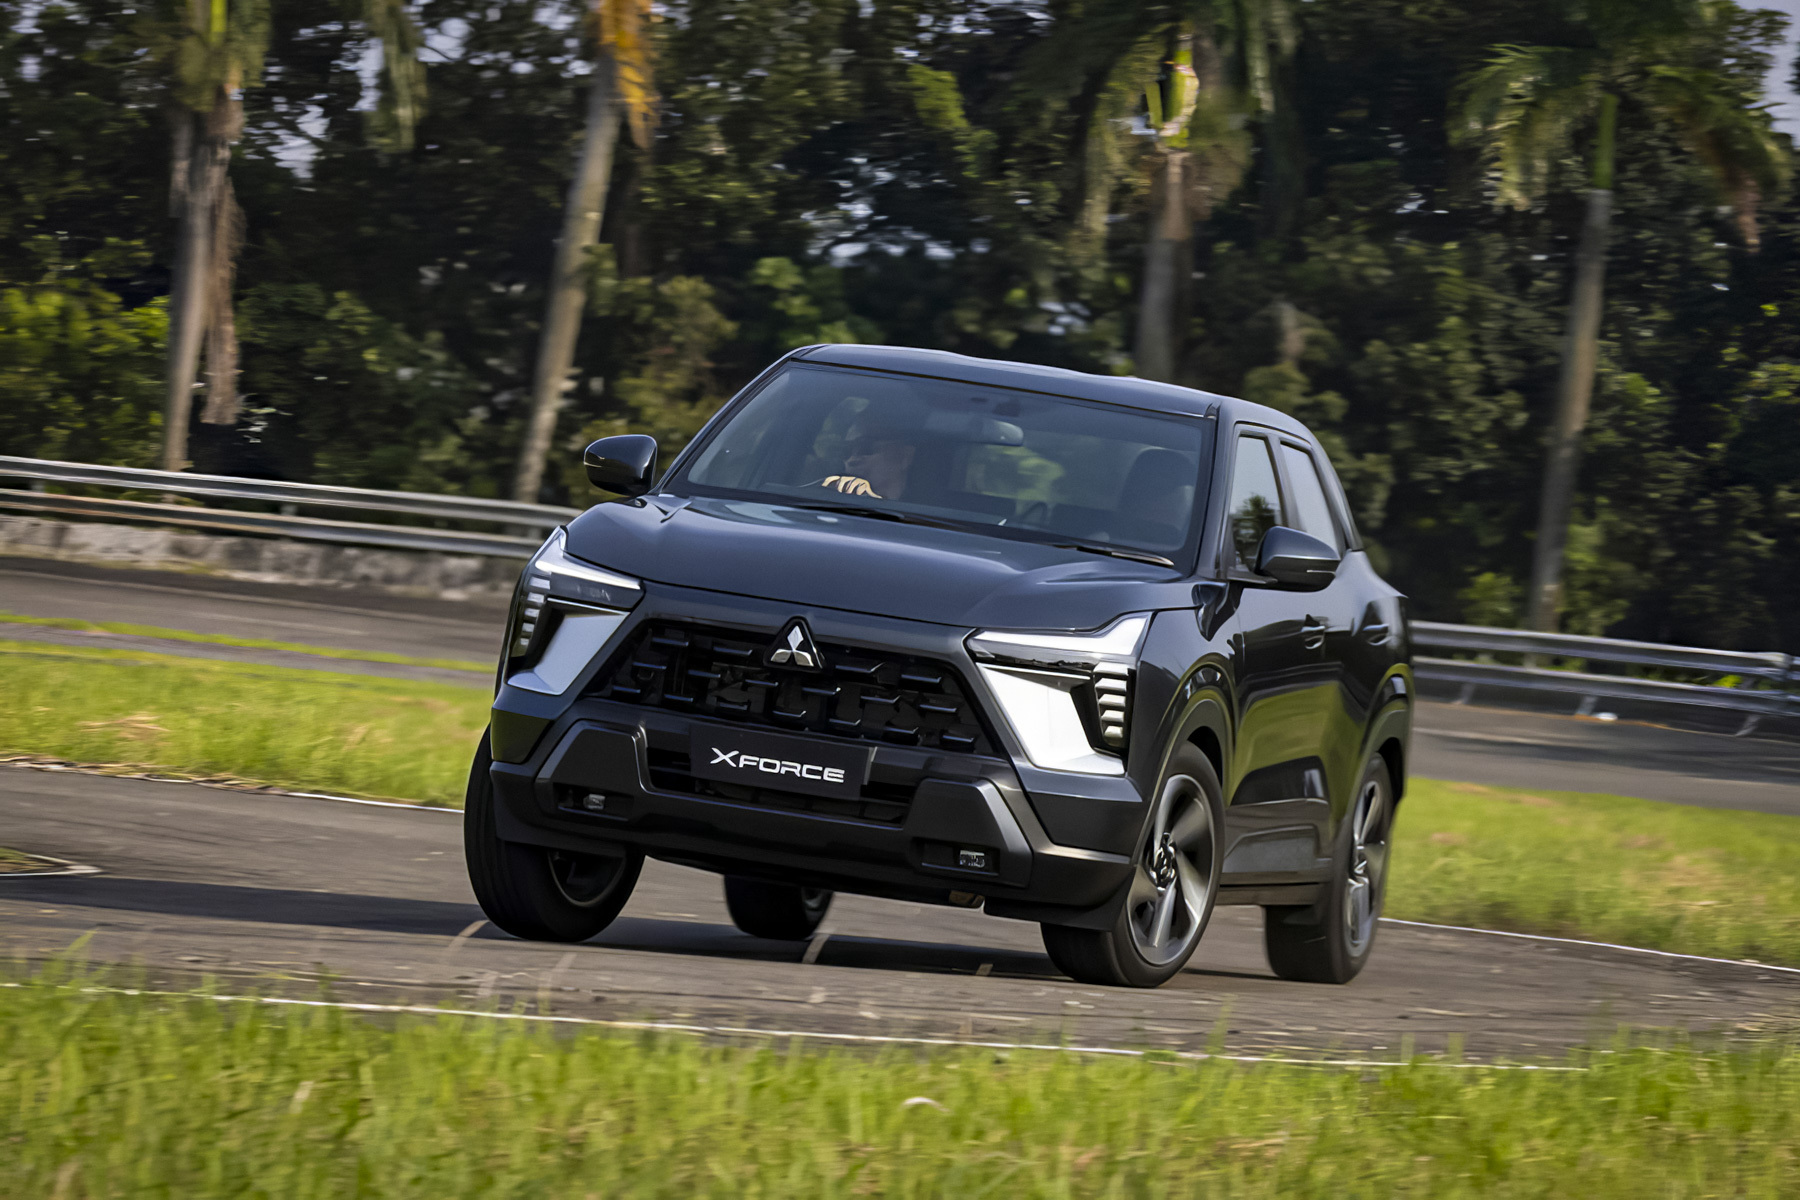 Mitsubishi introduced Xforce crossover for emerging markets